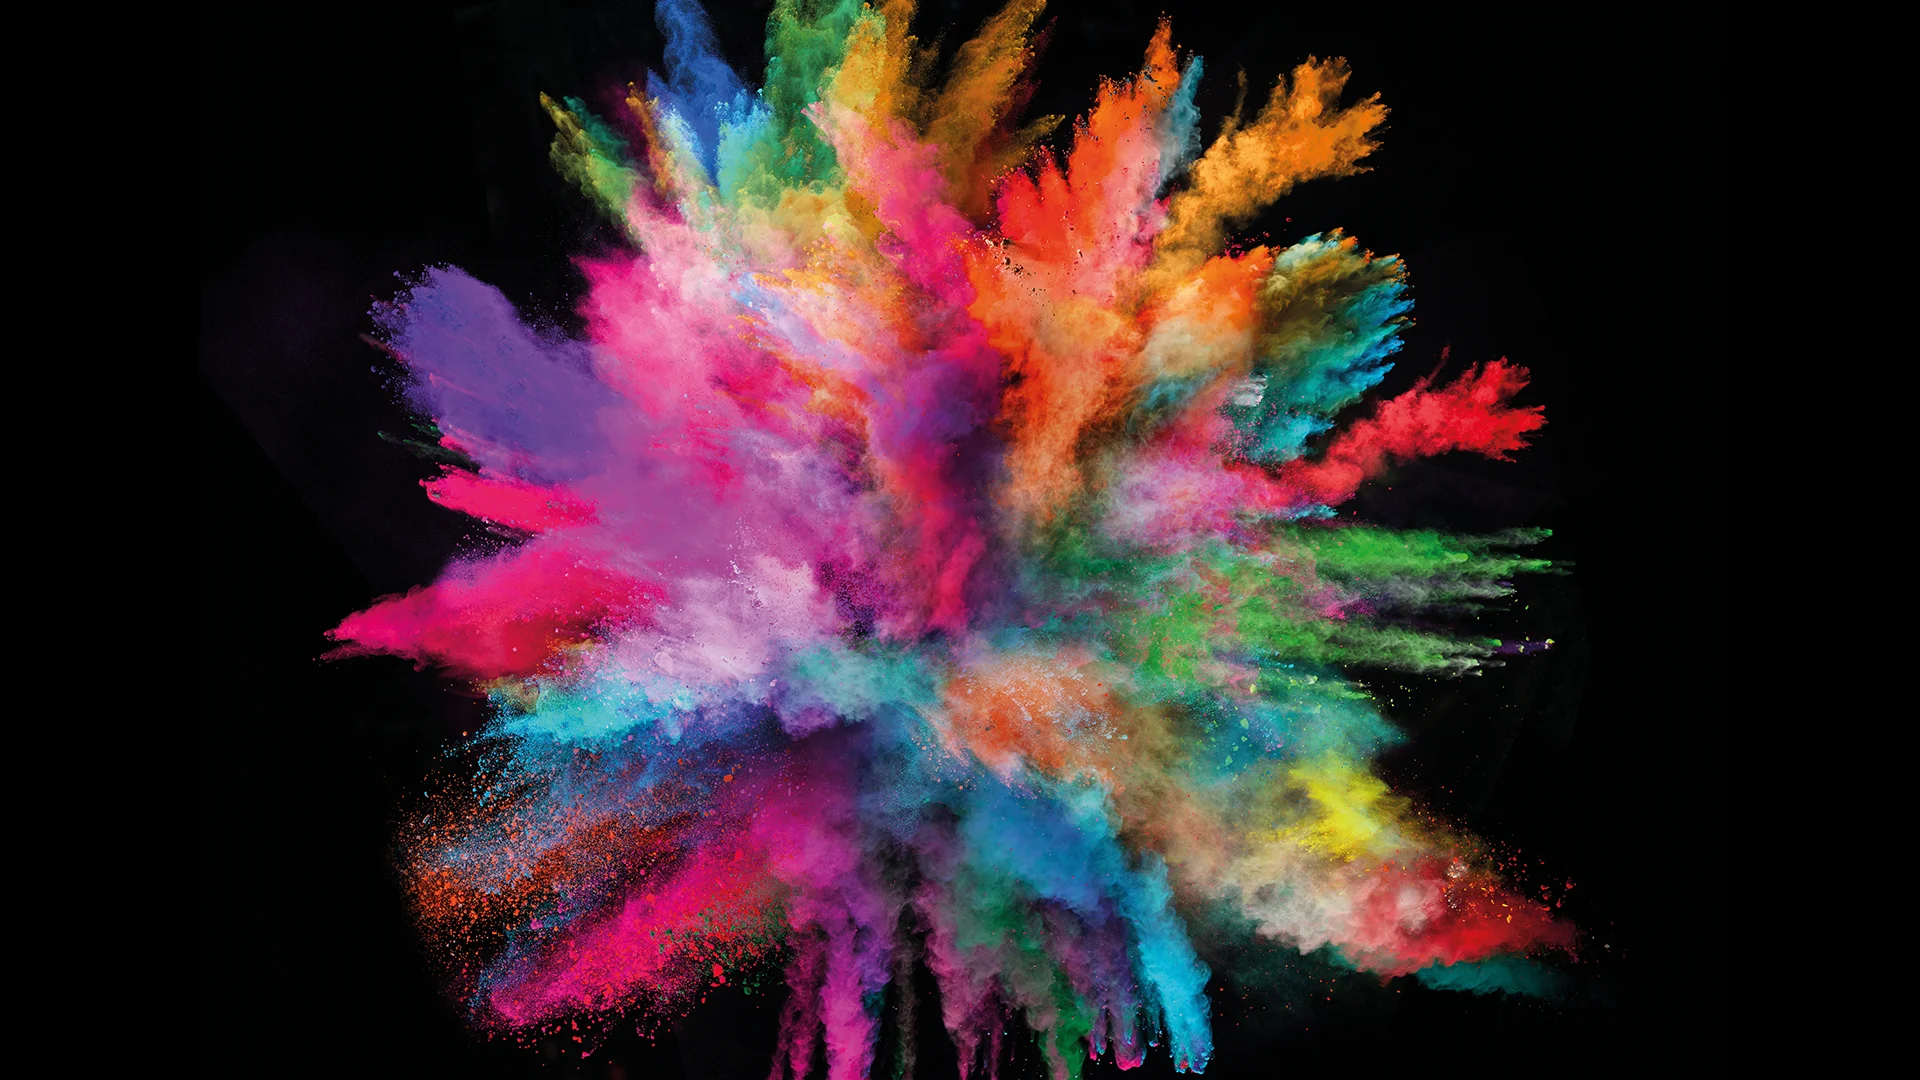 Colorful powder paints explode in front of dark background